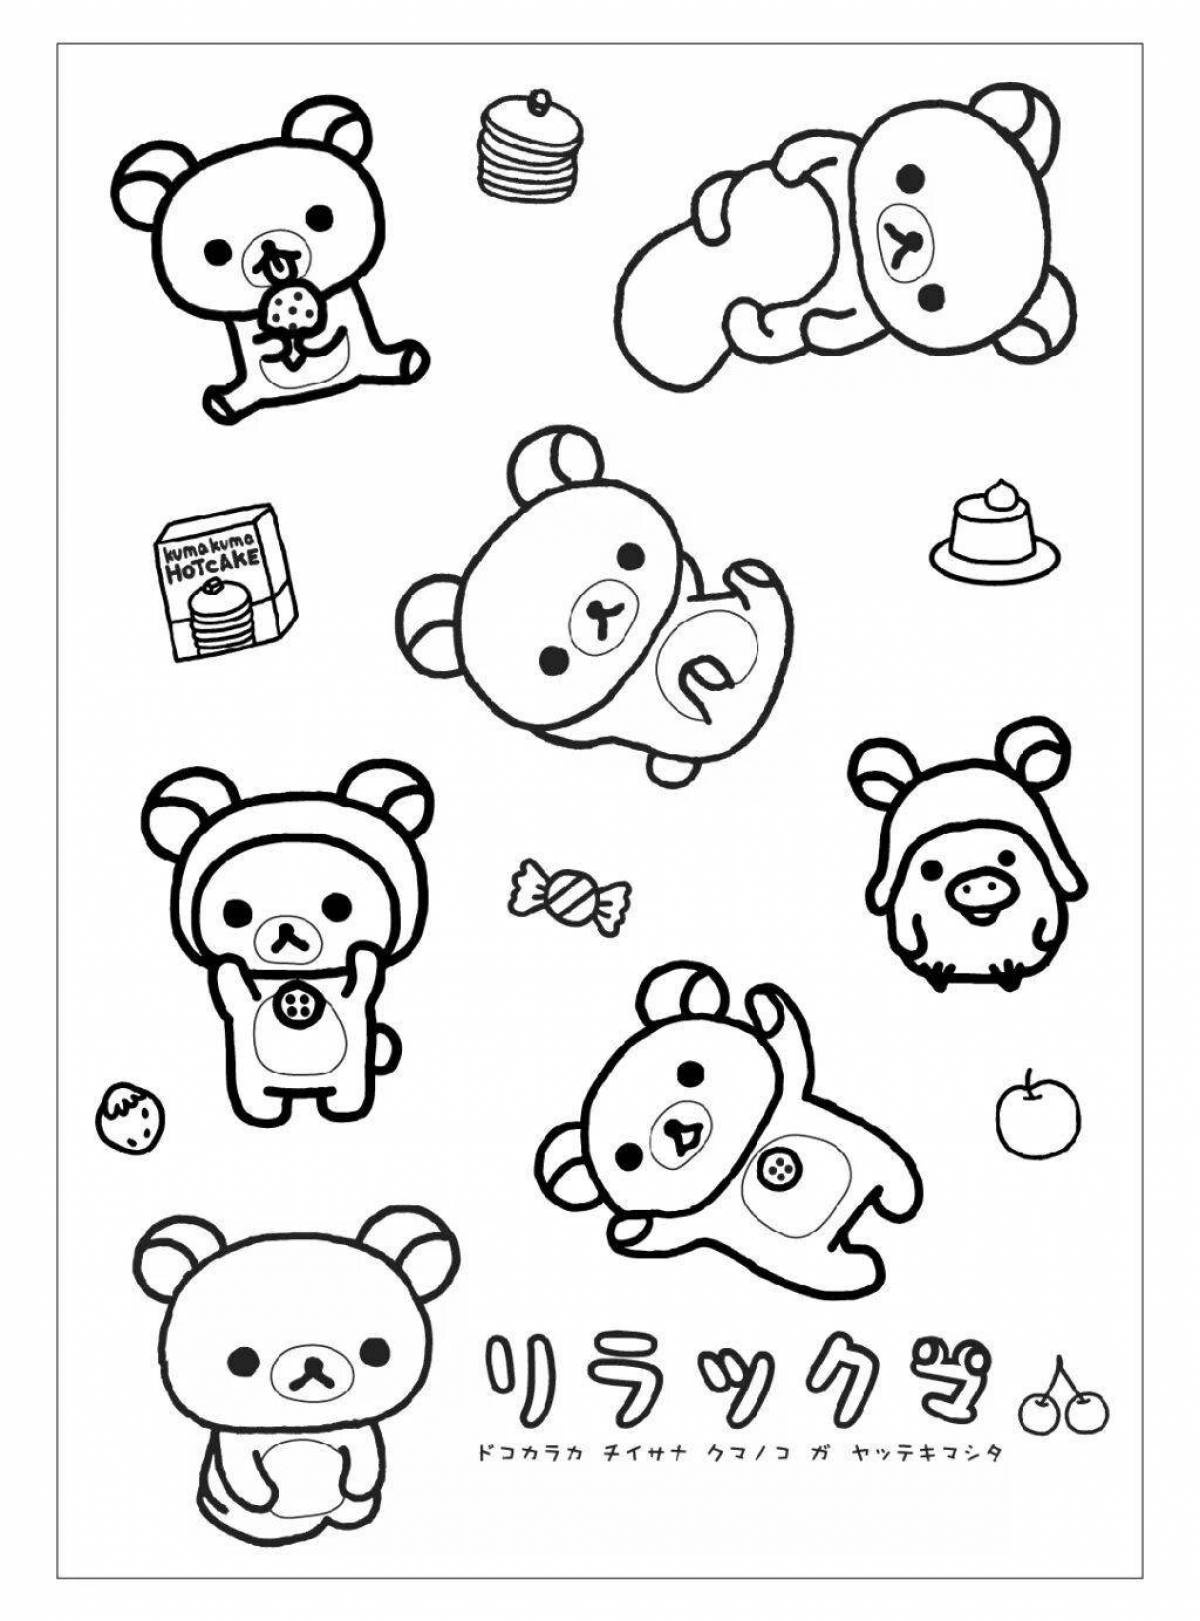 Dazzling coloring small sticker drawings